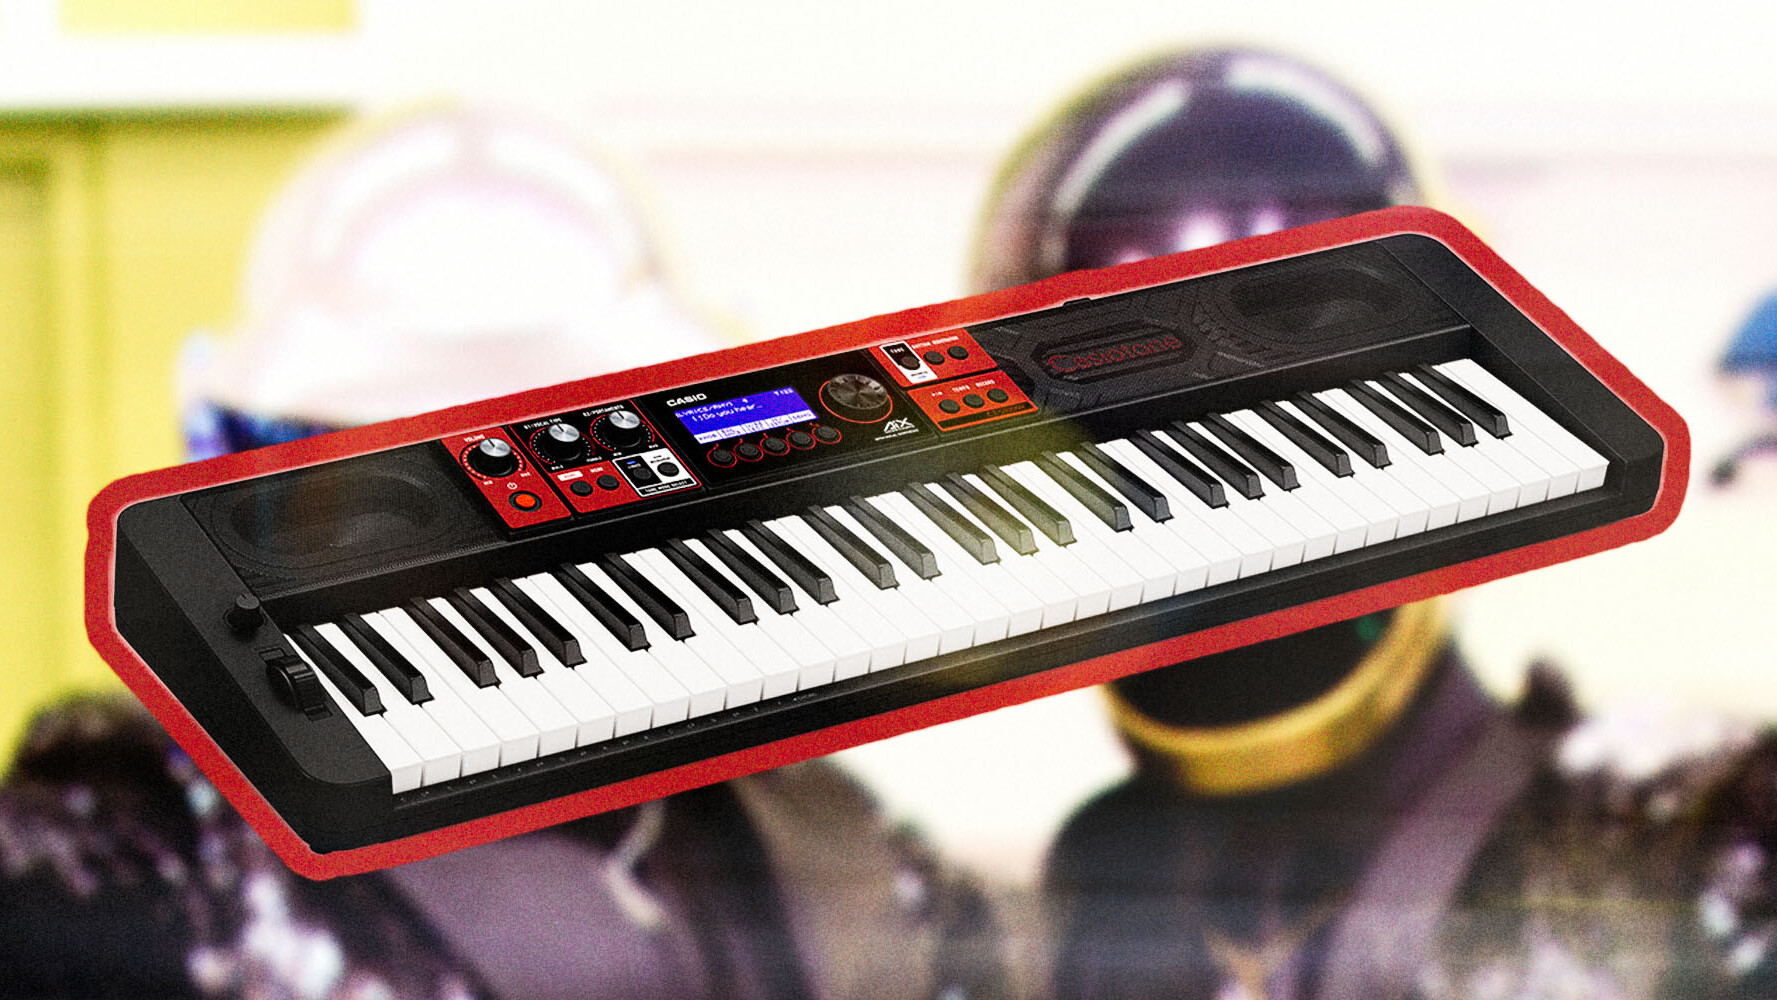 Casio’s CT-S1000V keyboard makes it easy to sound like Daft Punk